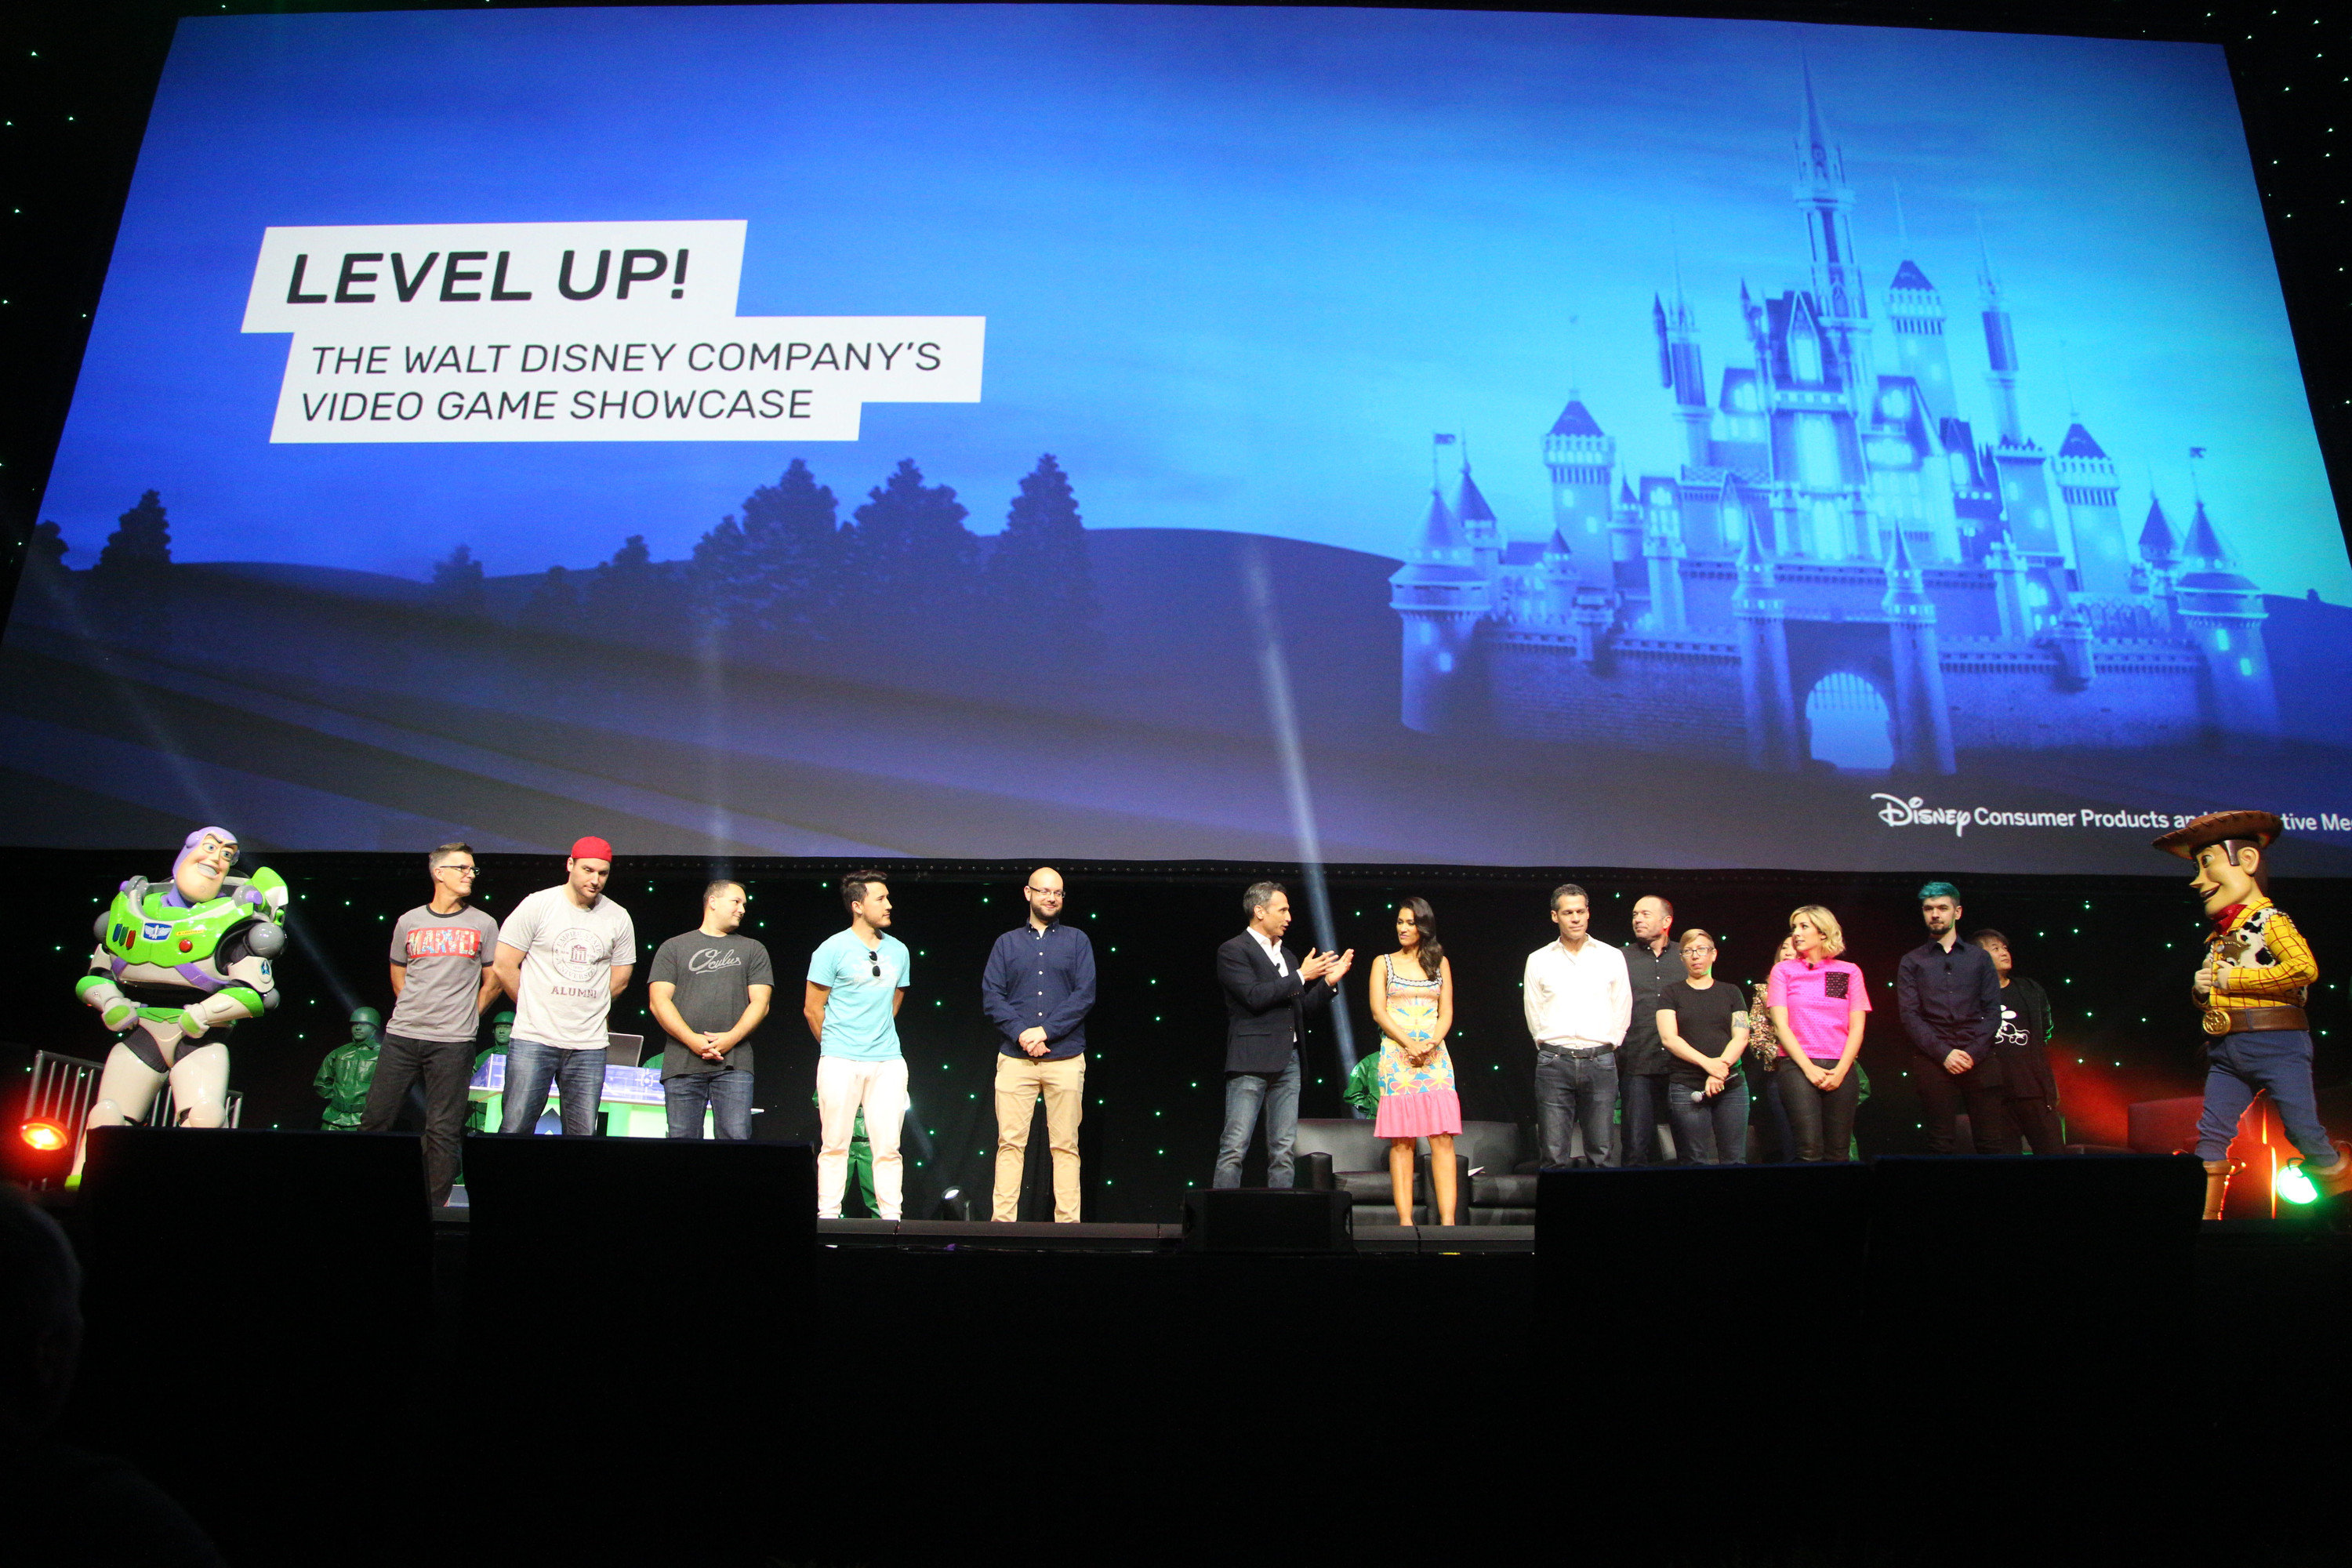 D23 Expo Level Up! Panel Showcases The Walt Disney Company’s Upcoming Games Line-Up